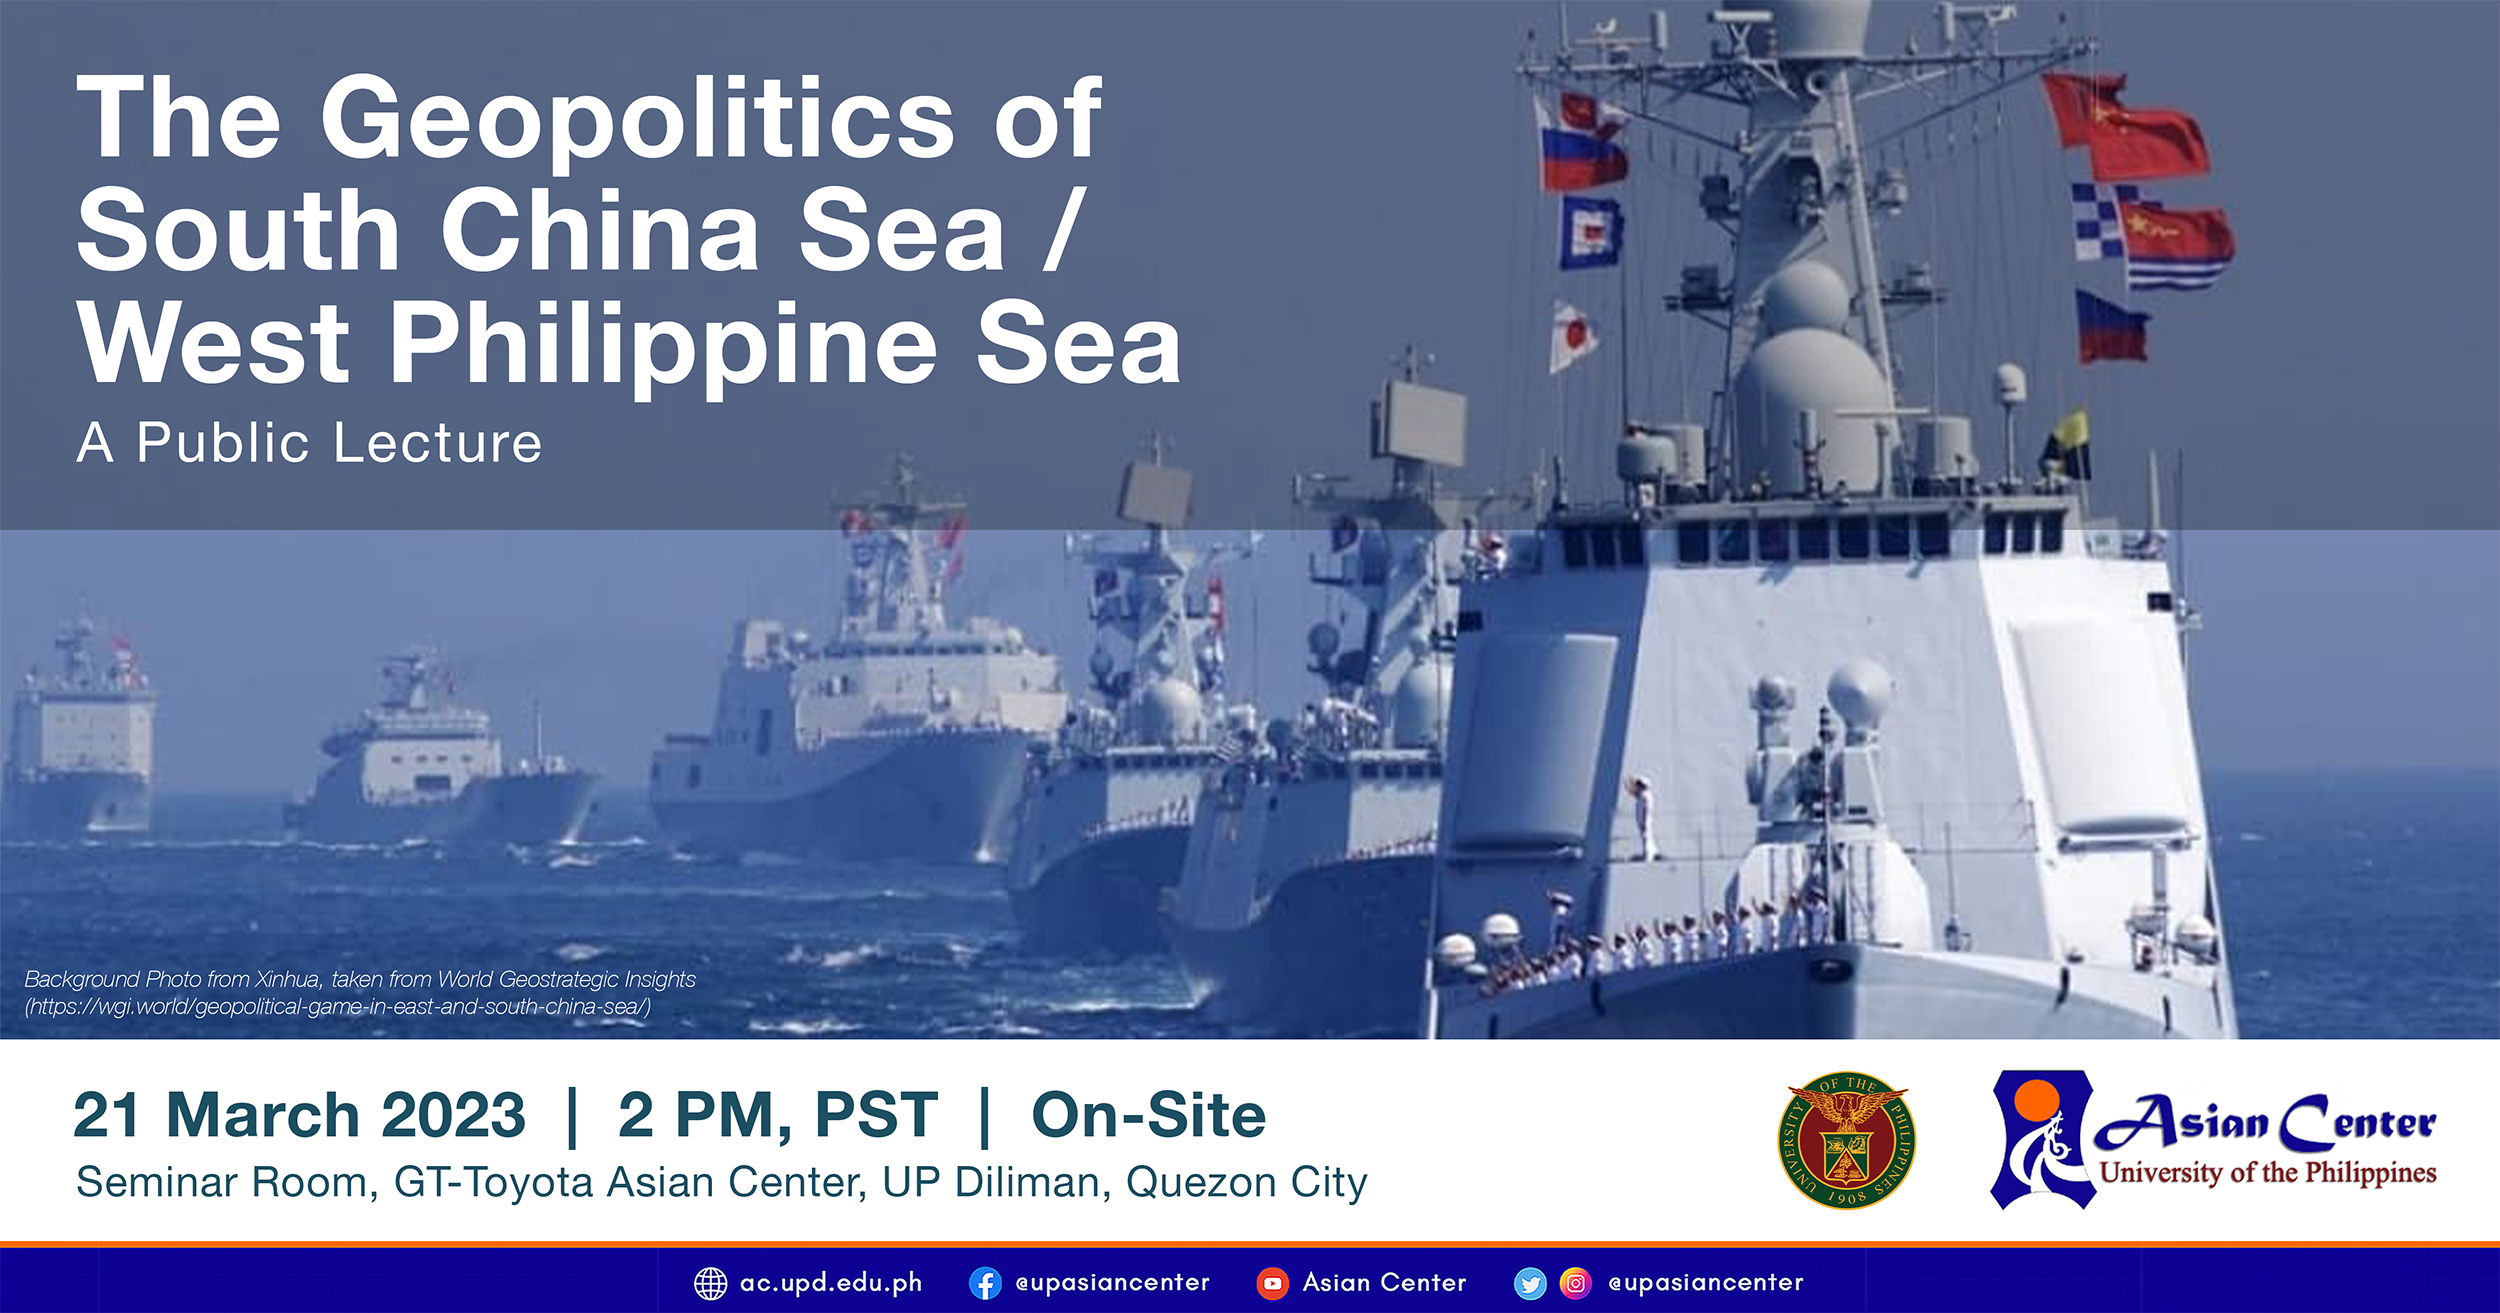 The Geopolitics of the South China/West Philippine Sea | A Public Lecture